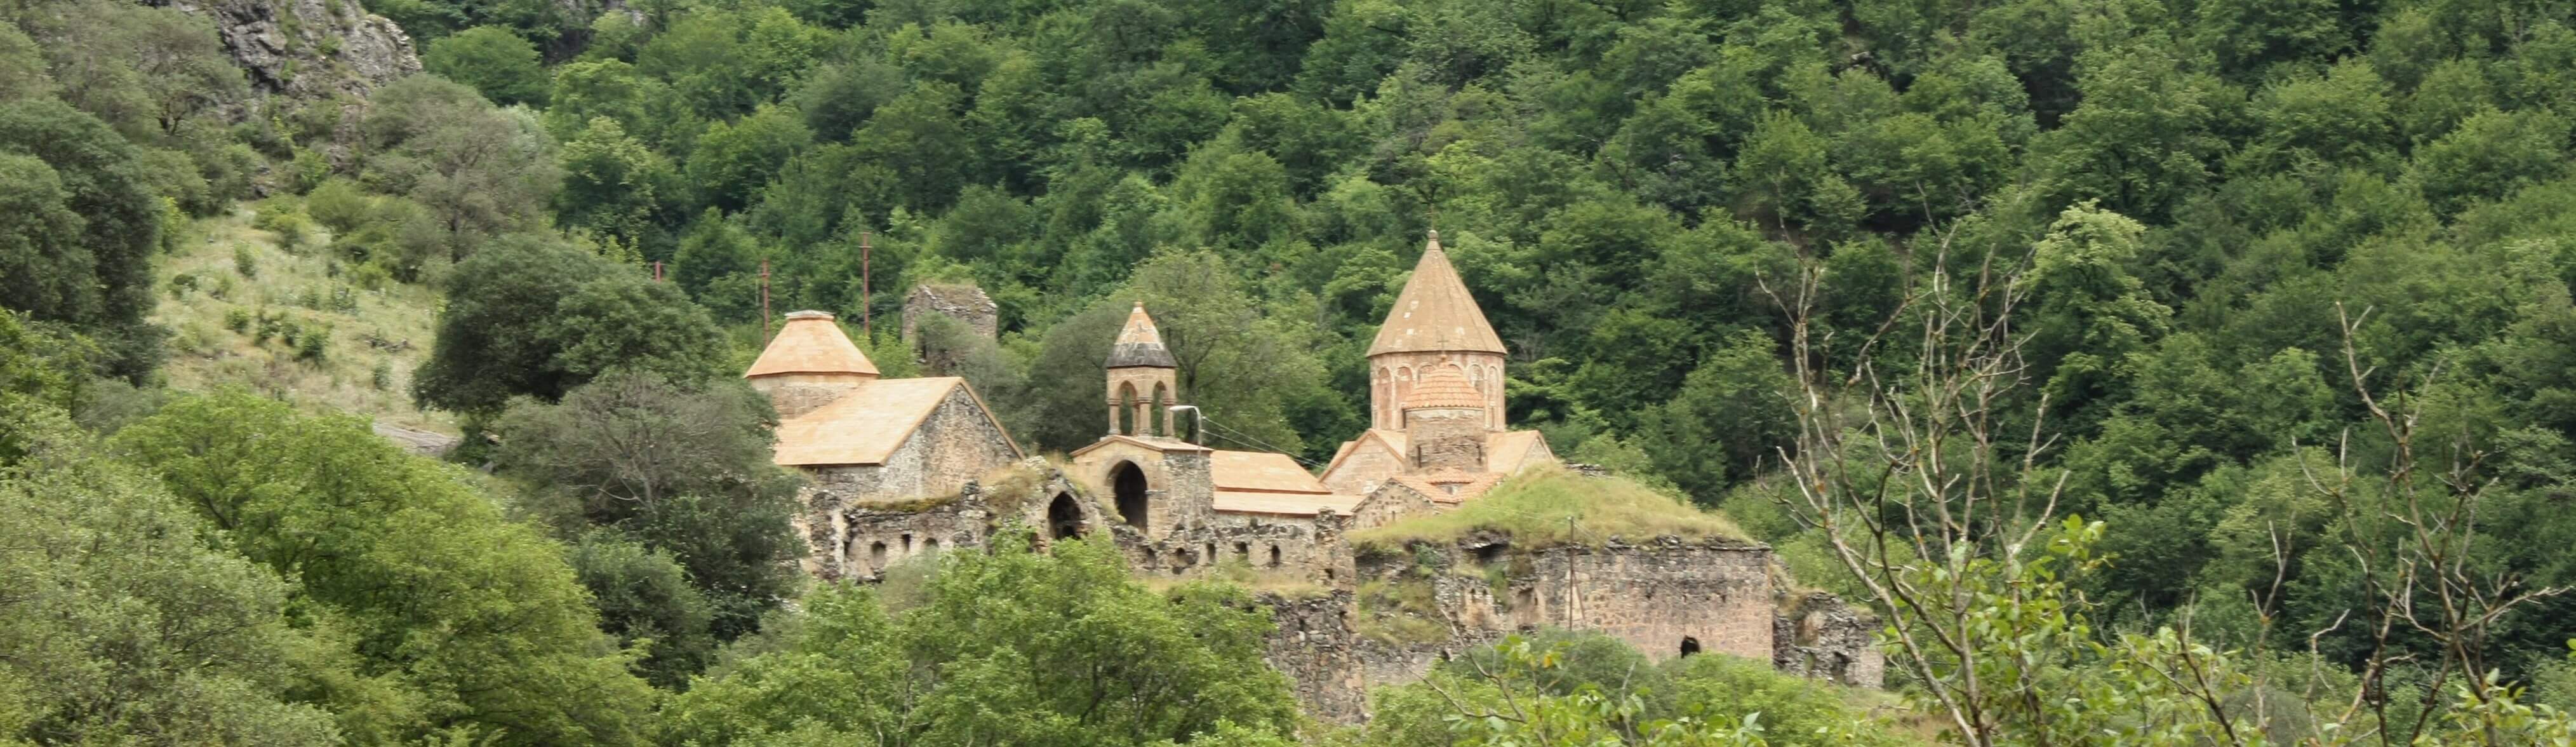 Dadivank Monastery, Nagorno-Karabakh. Photo by [Alaexis](https://commons.wikimedia.org/wiki/User:Alaexis) (CC-BY-3.0).